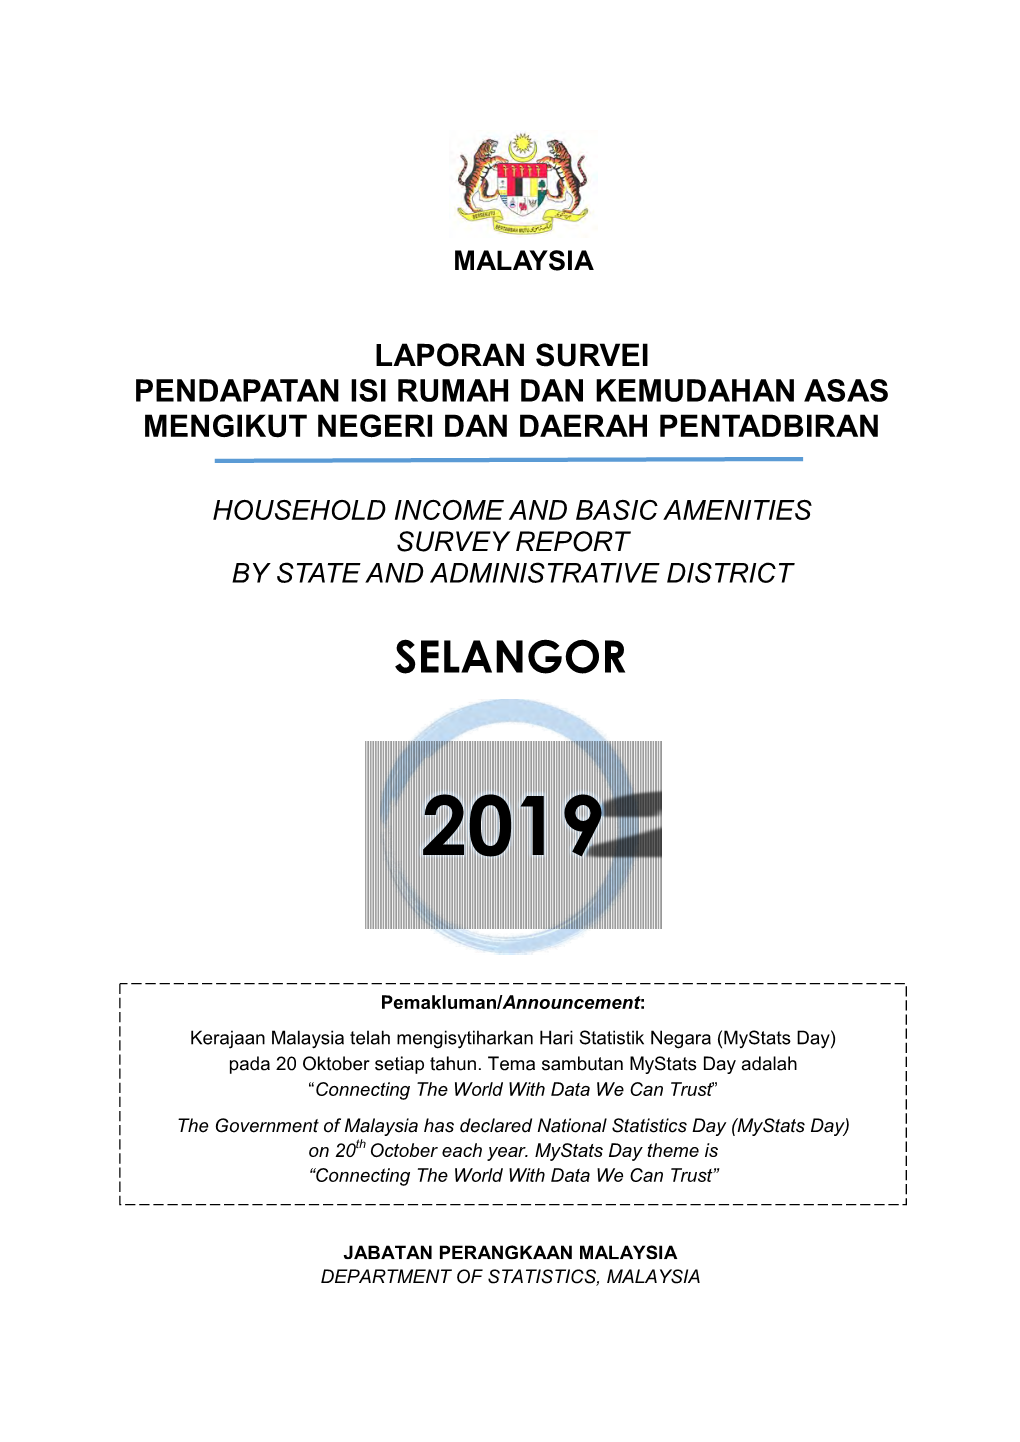 Household Income and Basic Amenities Survey Report by State and Administrative District Selangor